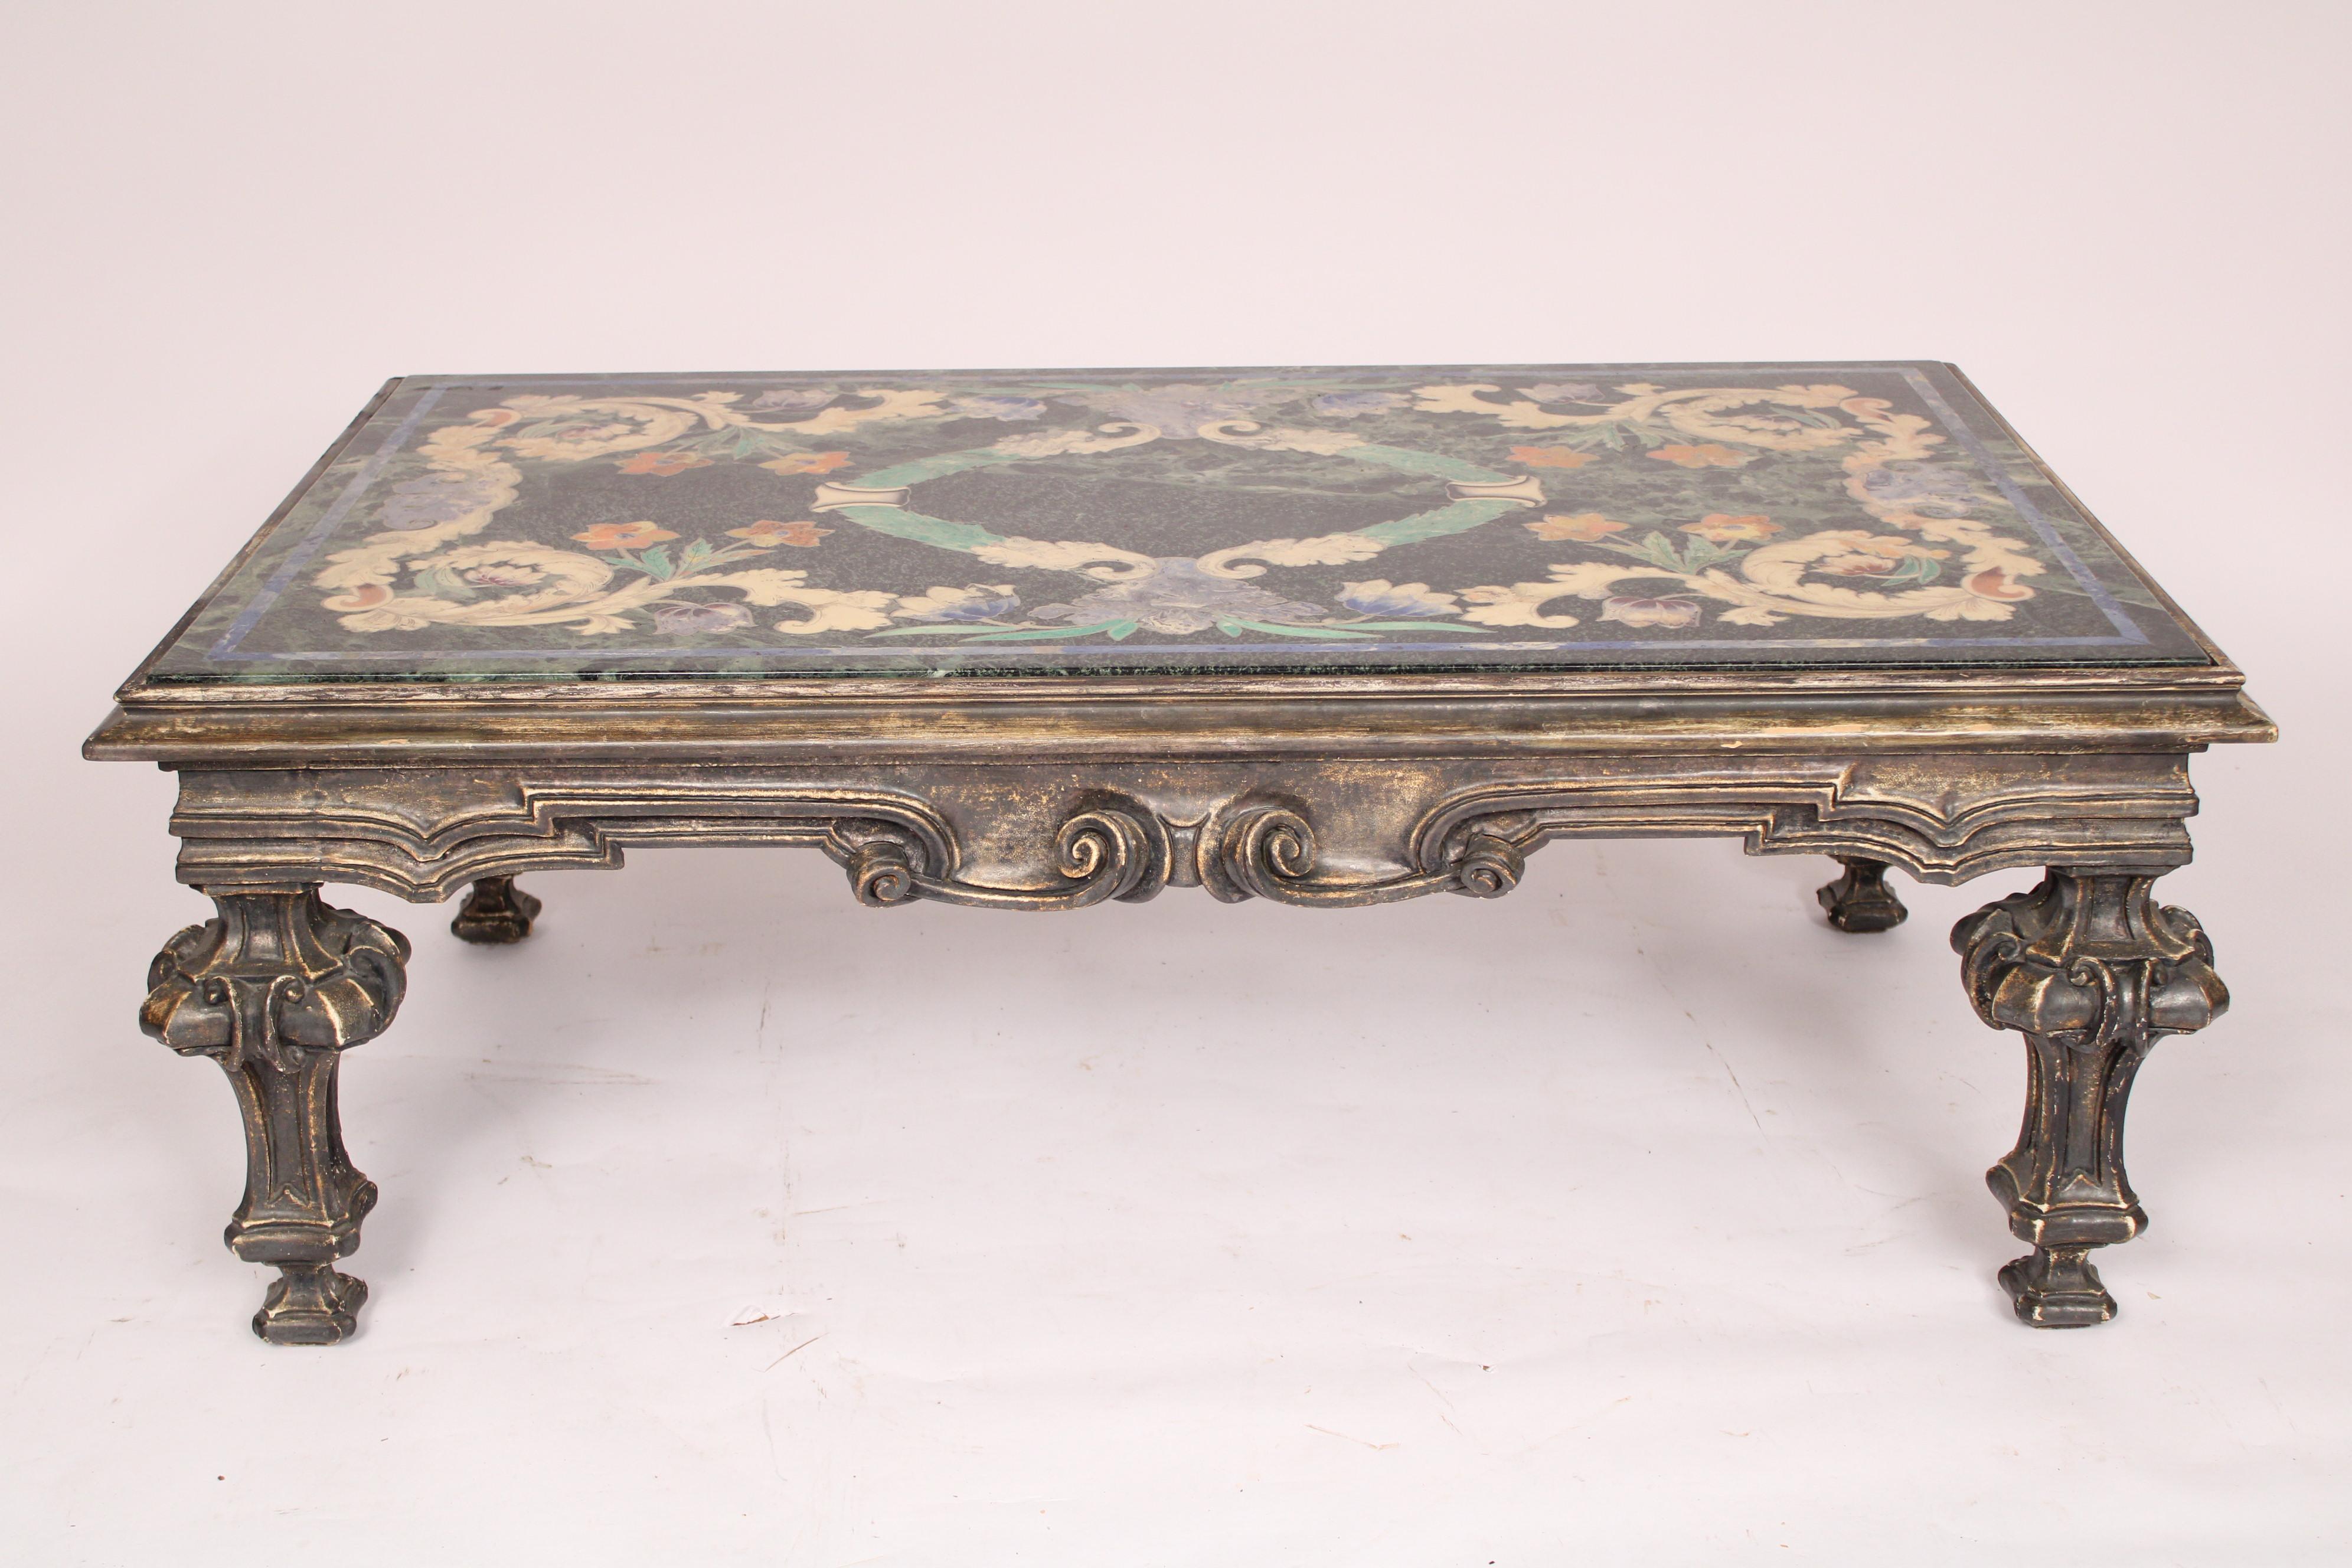 Baroque style scagliola decorated marble top coffee table, mid 20th century. With a scagliola marble top, inset into a wood carved silver leaf baroque style coffee table frame. Made in Italy, circa mid 20th century. Professional restoration to